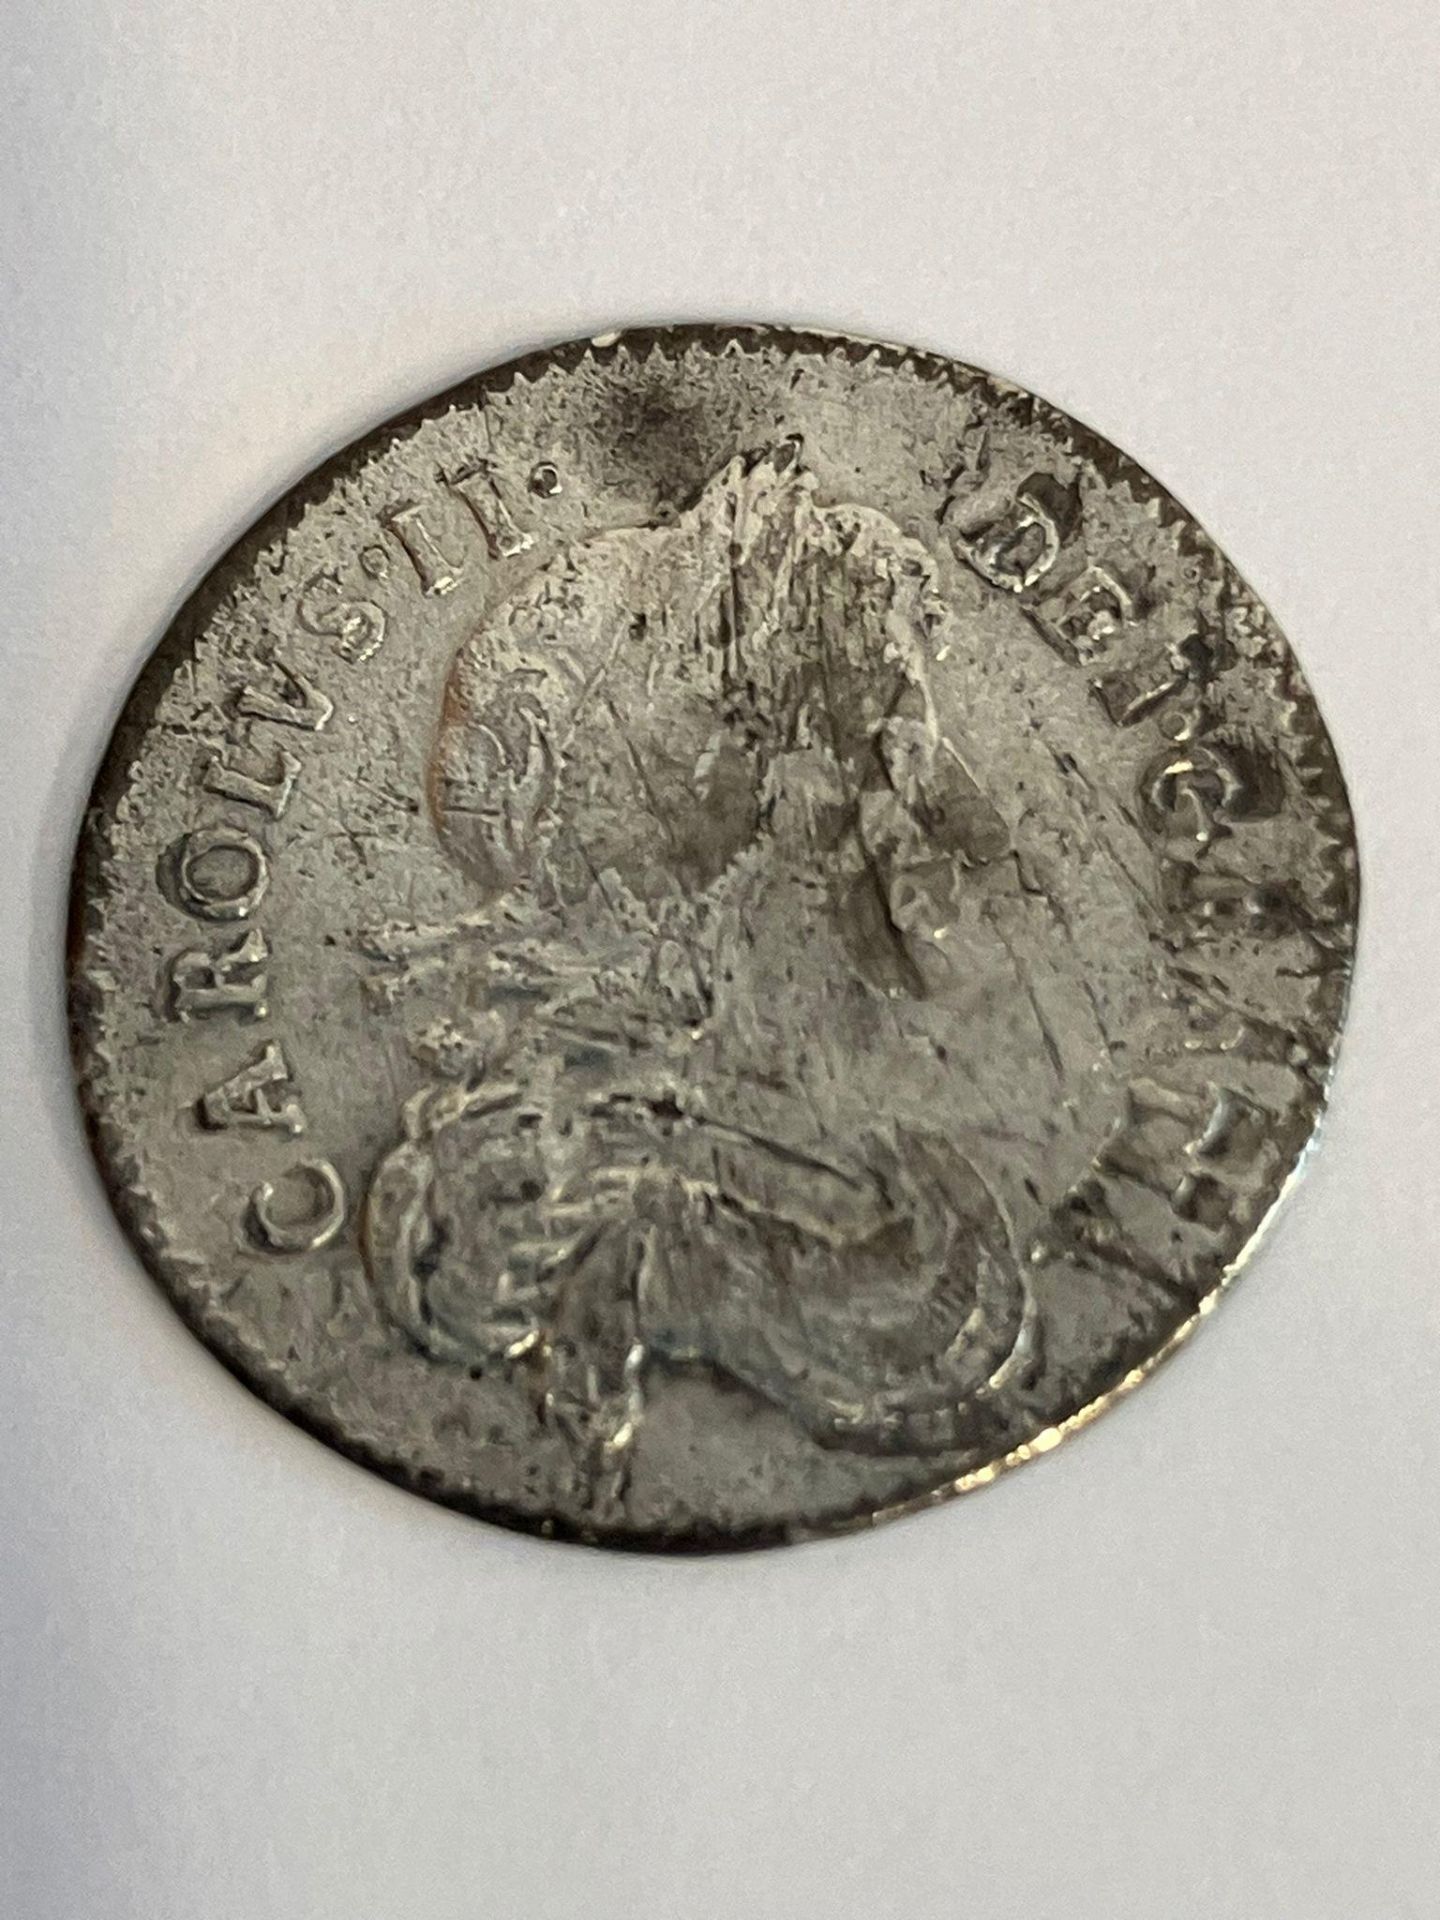 1676 CHARLES II SILVER THREEPENCE. Fine/ Very Fine Condition. - Image 2 of 3